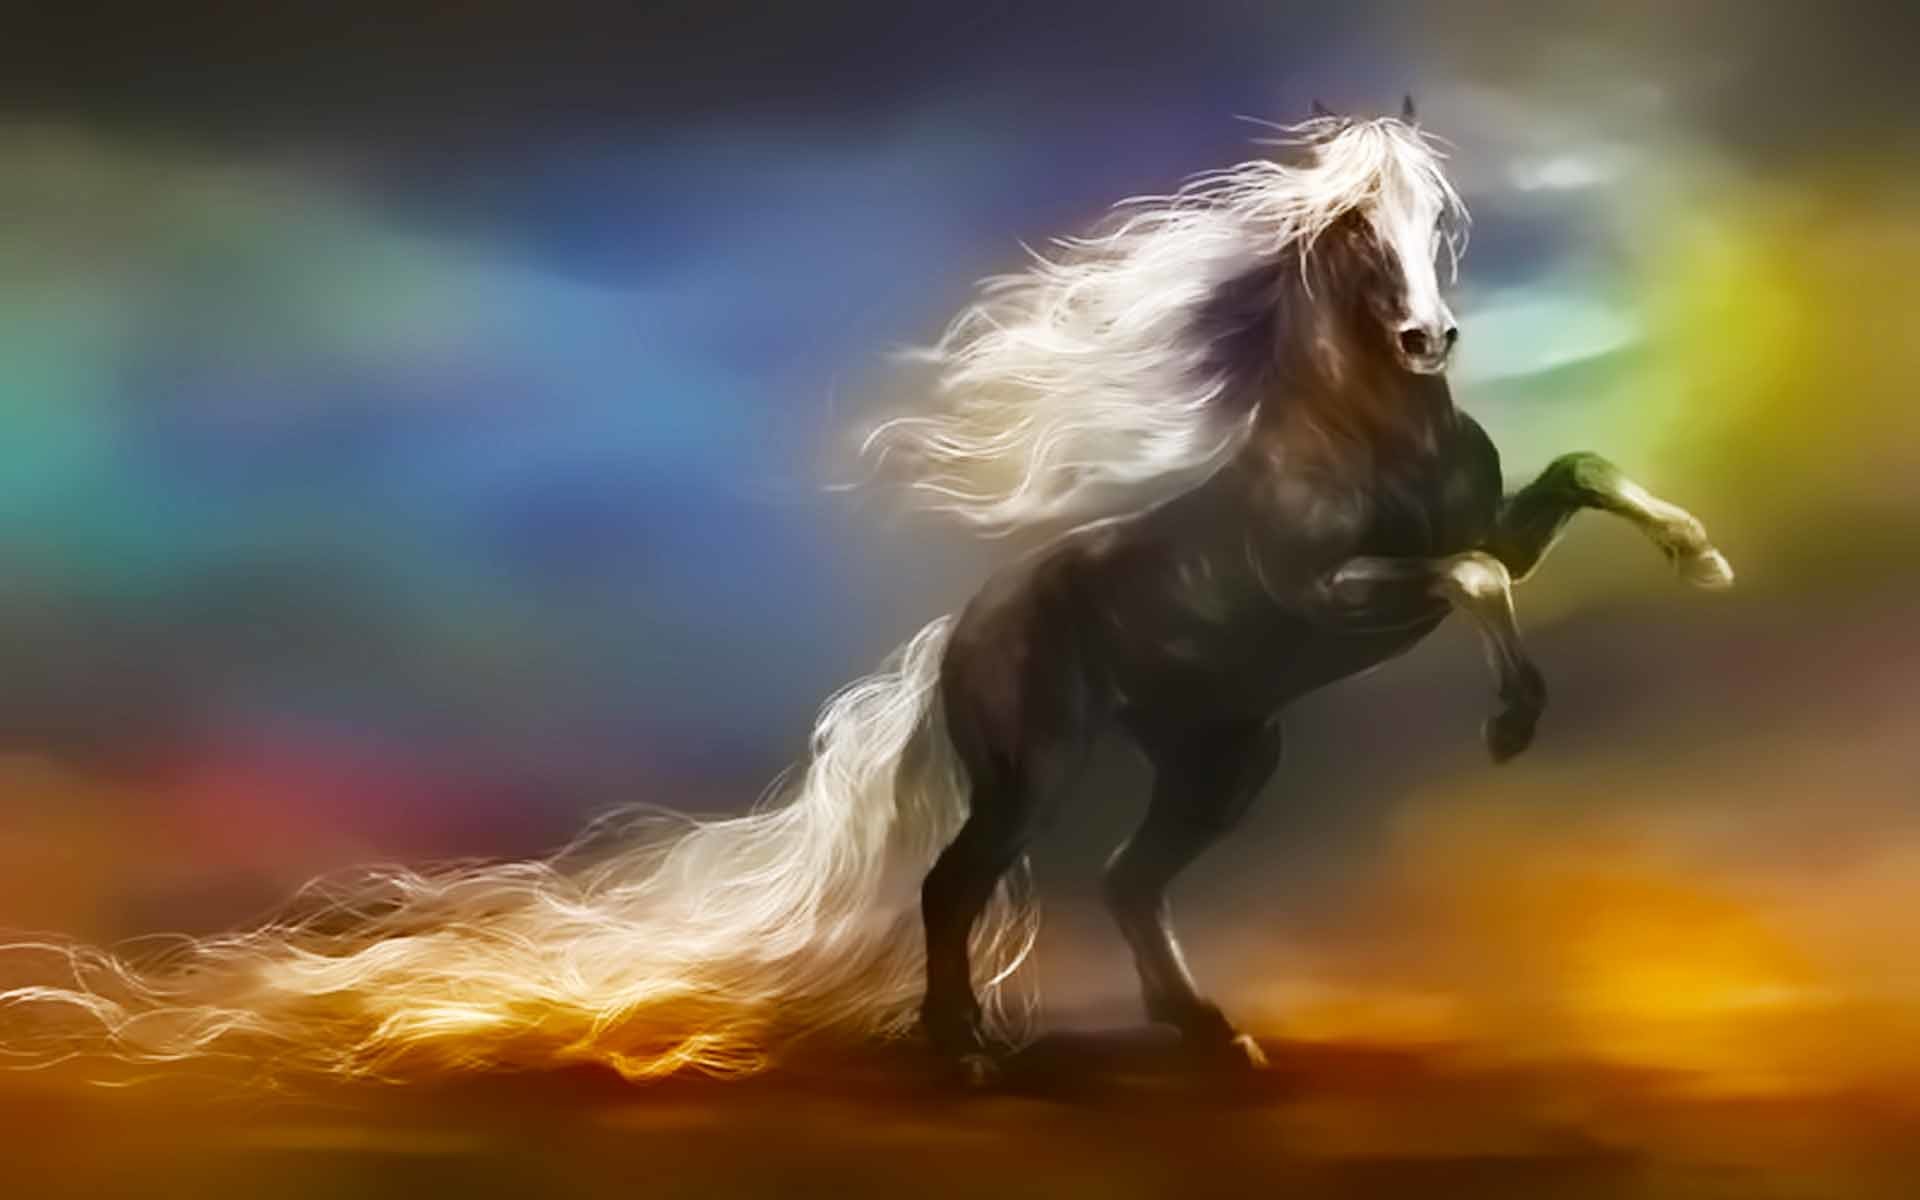 1920x1200 Horse wallpaper - Horse Long Tail Beauty Wallpapers - HD Wallpapers .